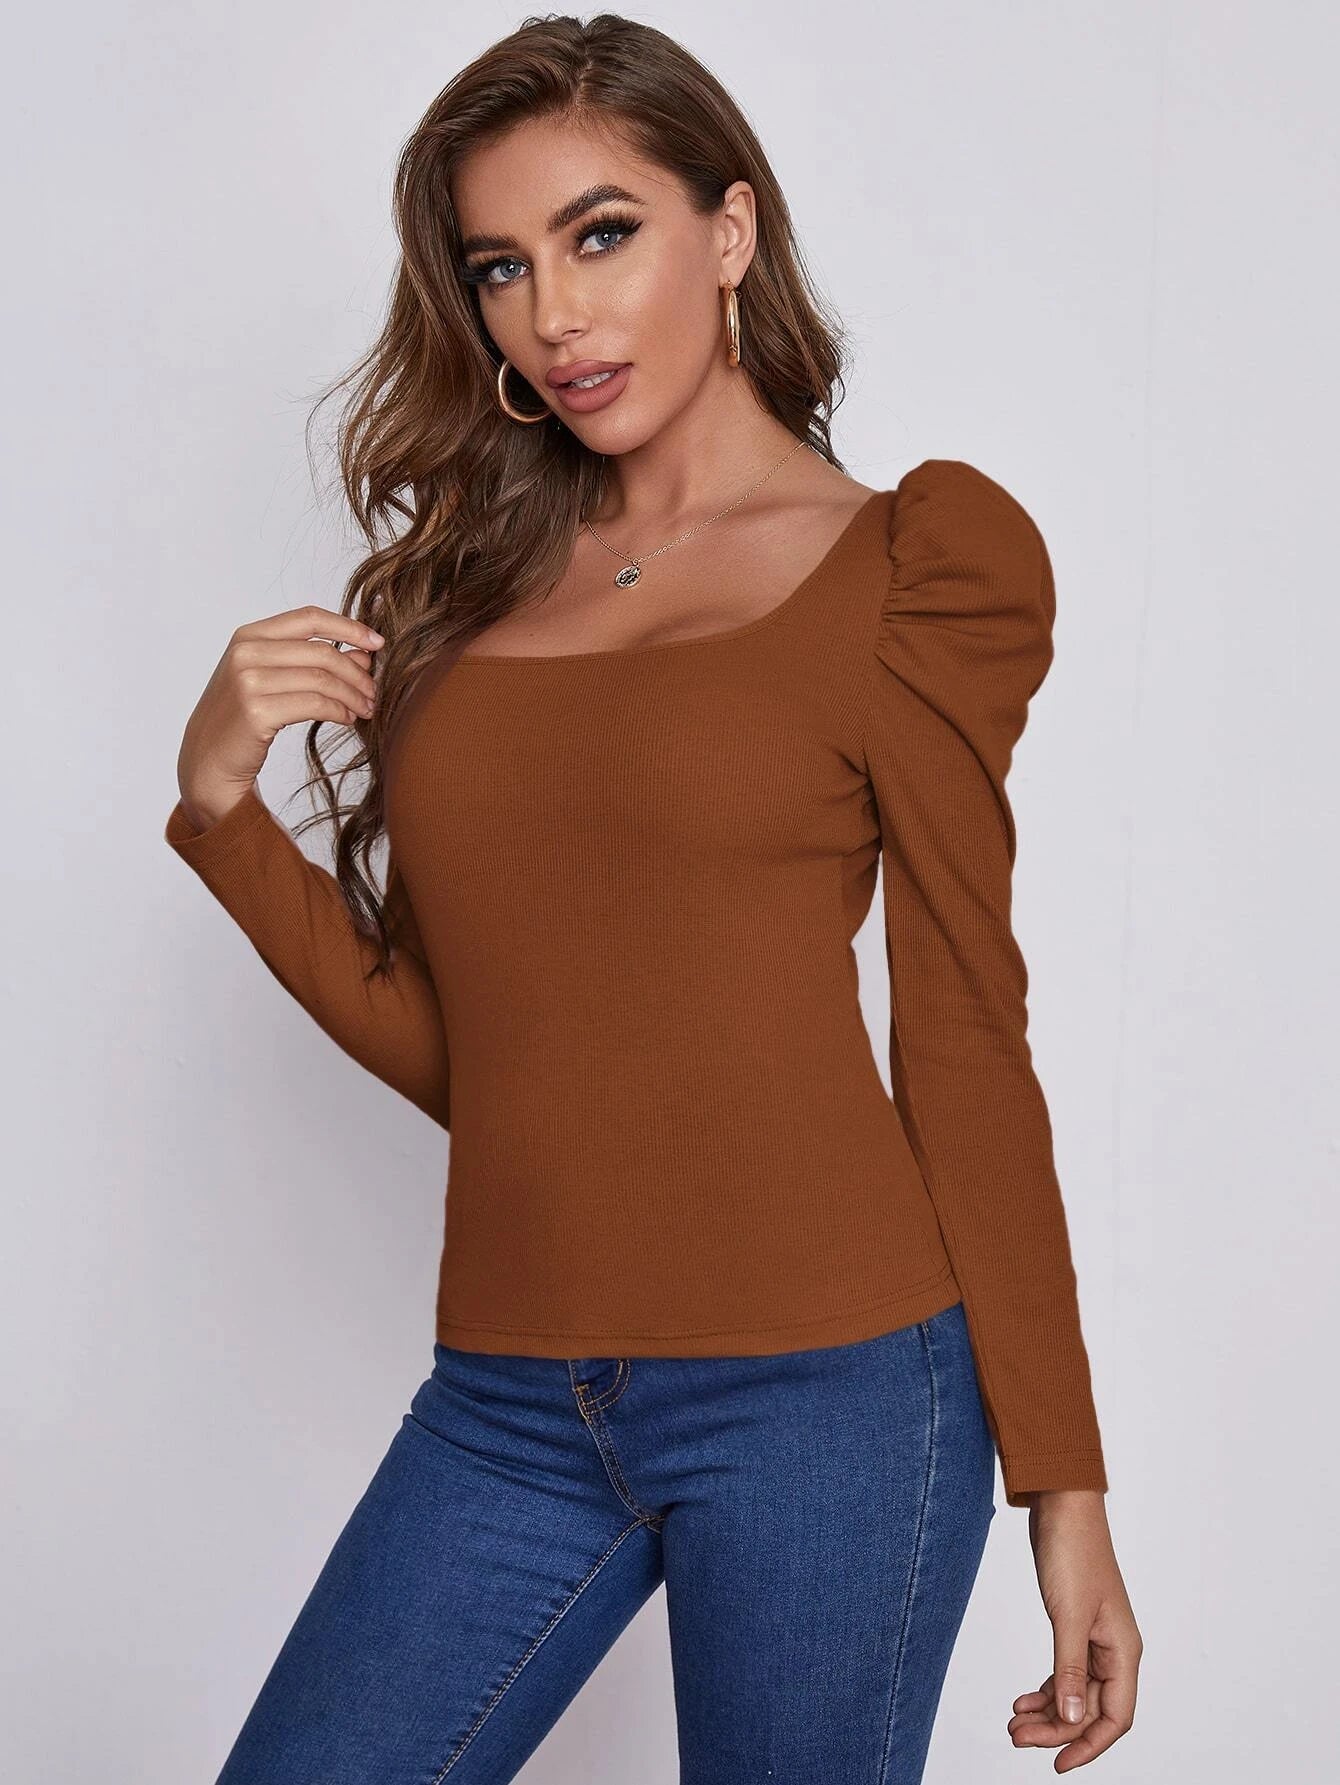 SHEIN EMERY ROSE Square Neck Leg-of-mutton Sleeve Top